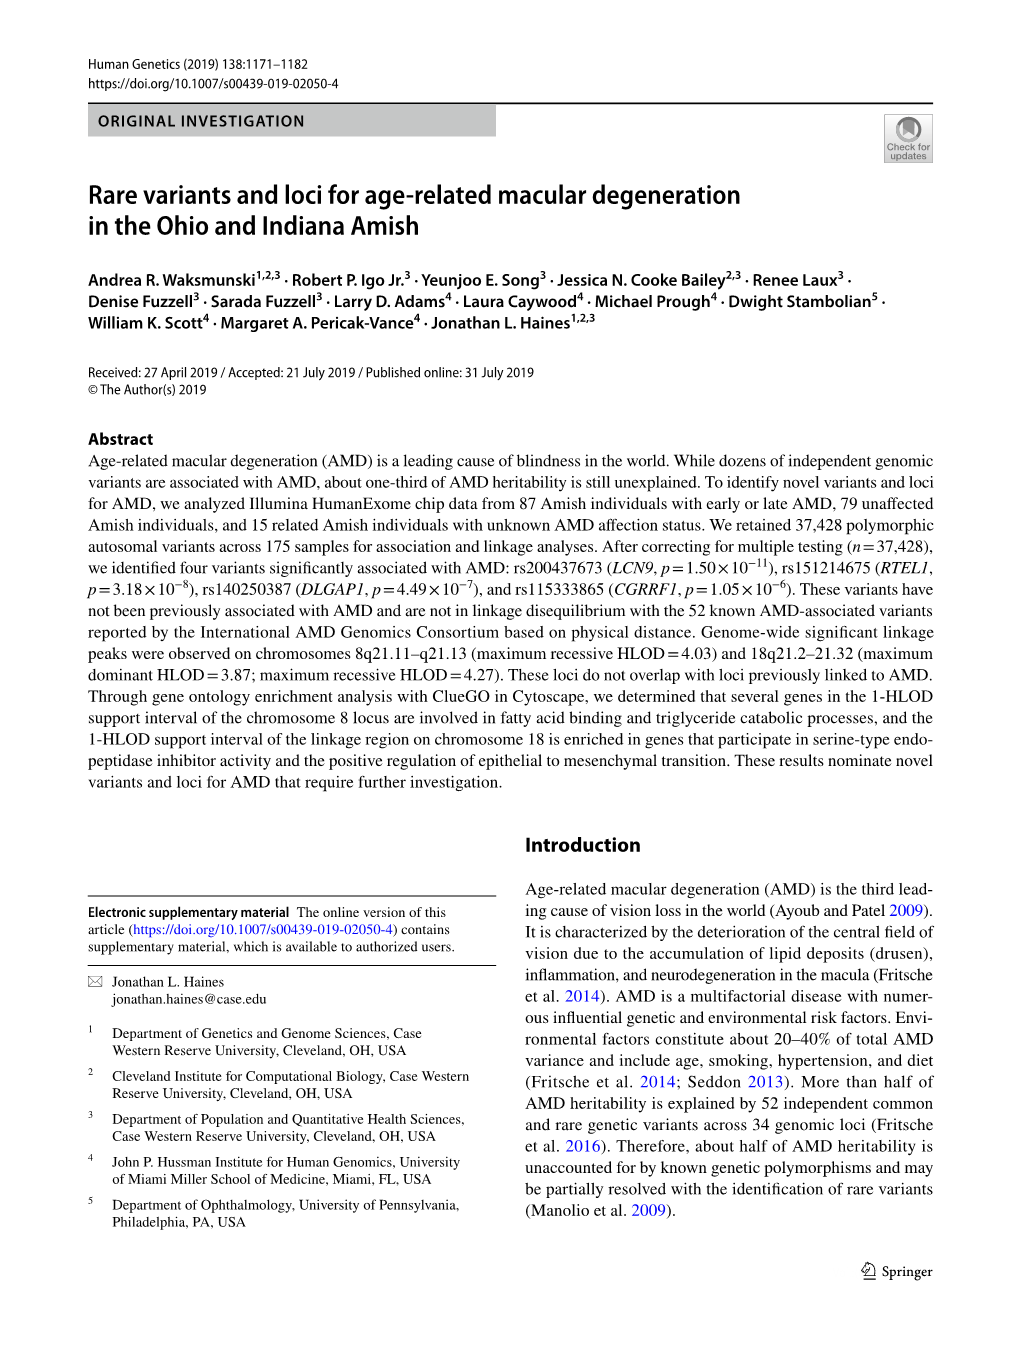 Rare Variants and Loci for Age-Related Macular Degeneration in The